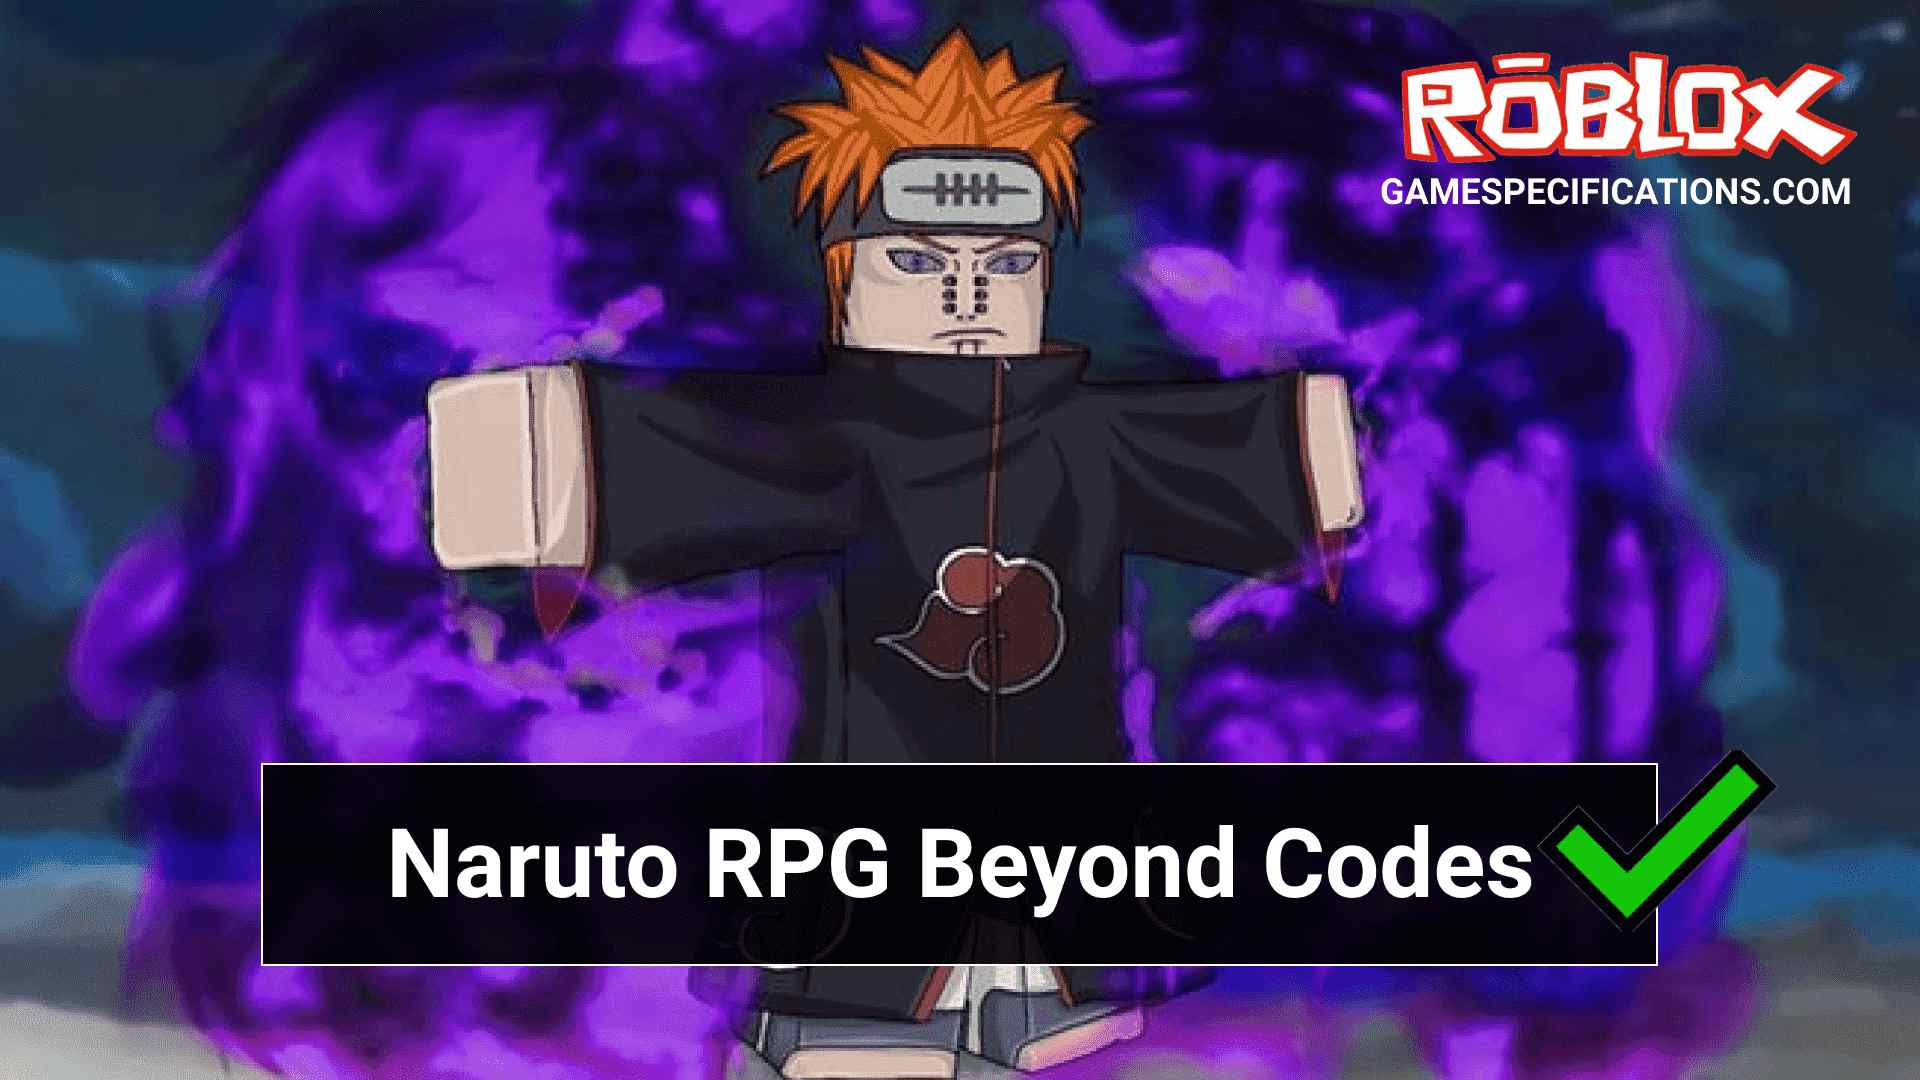 11 Roblox Naruto Rpg Beyond Codes For Free Spins July 2021 Game Specifications - naruto roblox id code